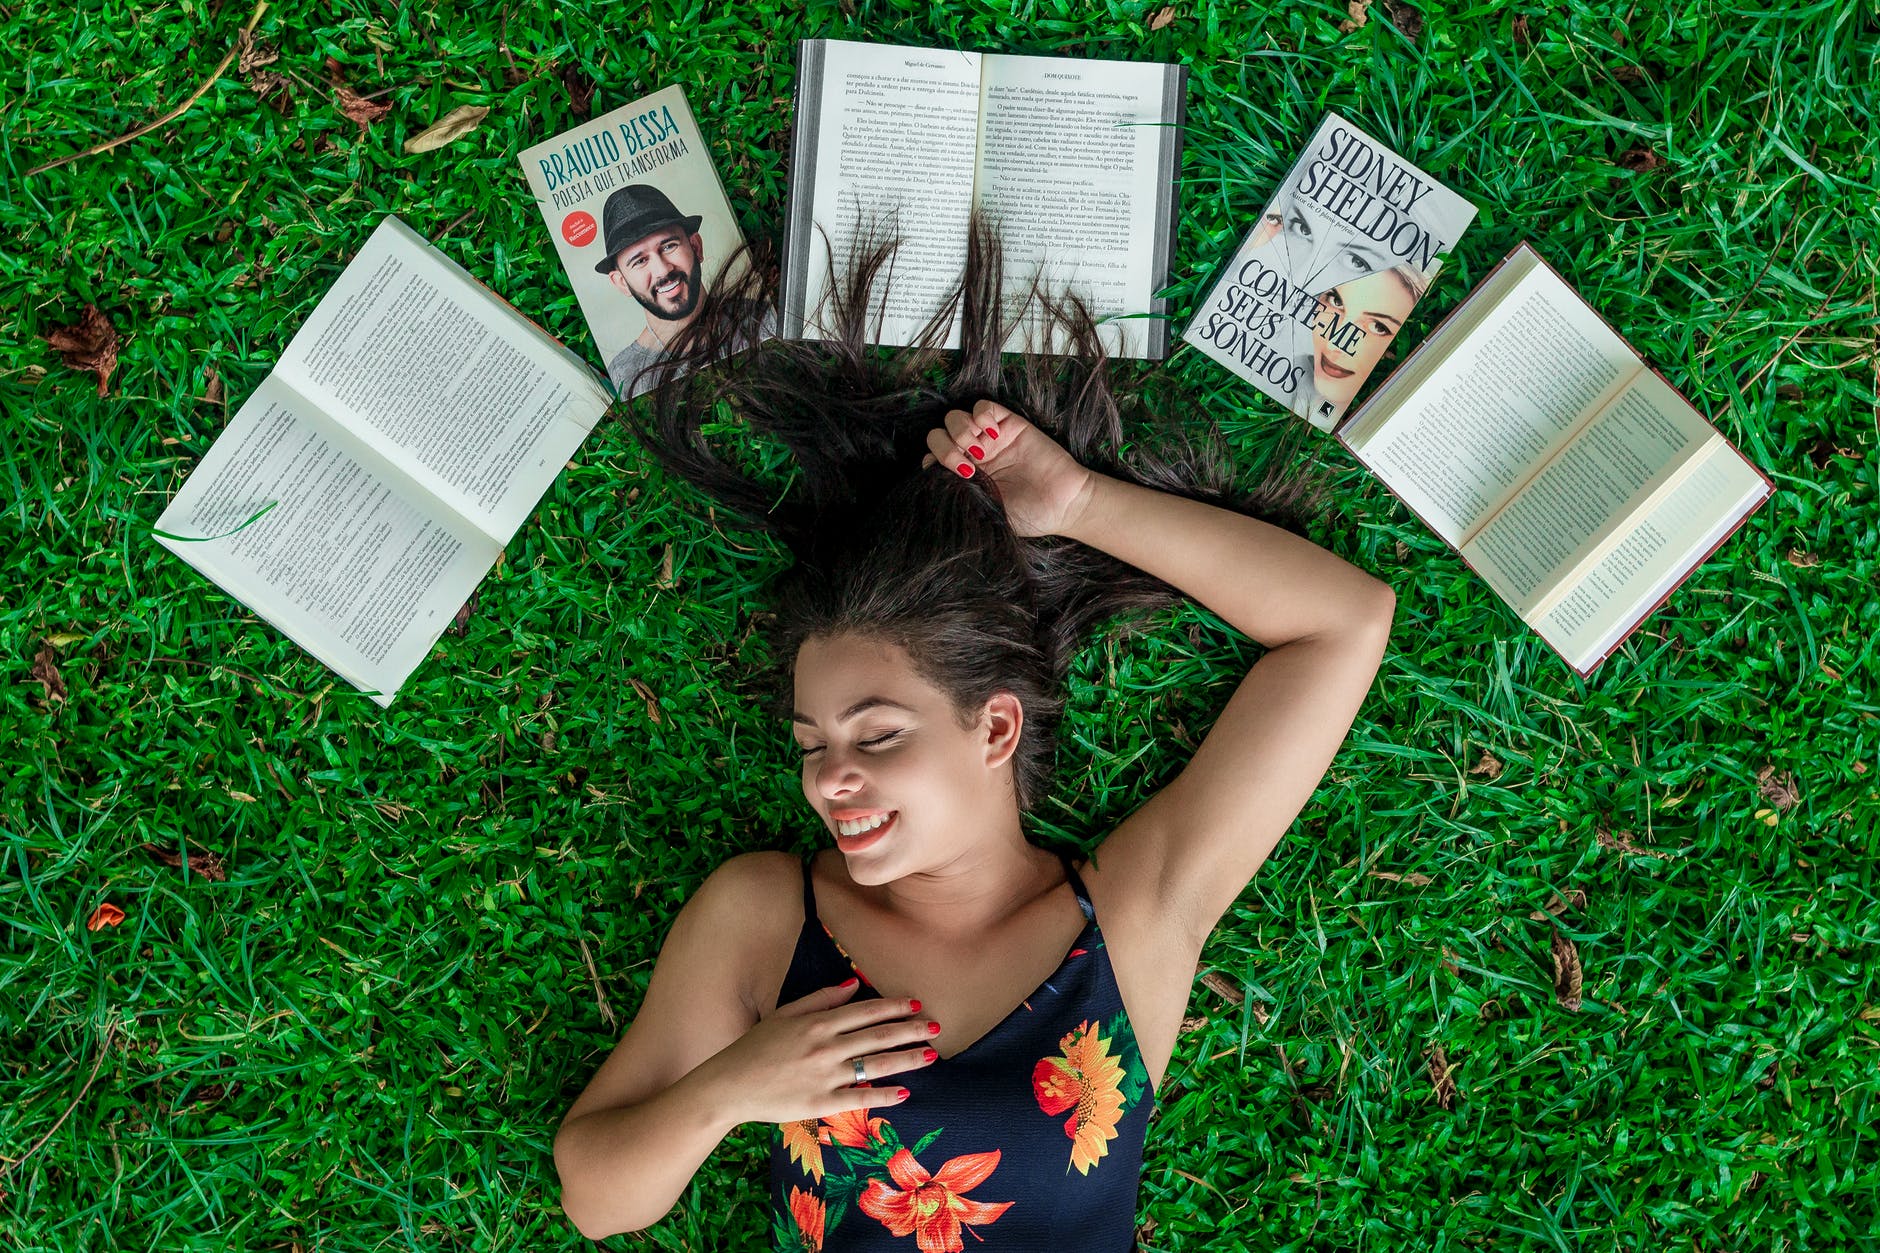 woman lying down on grass beside opened books